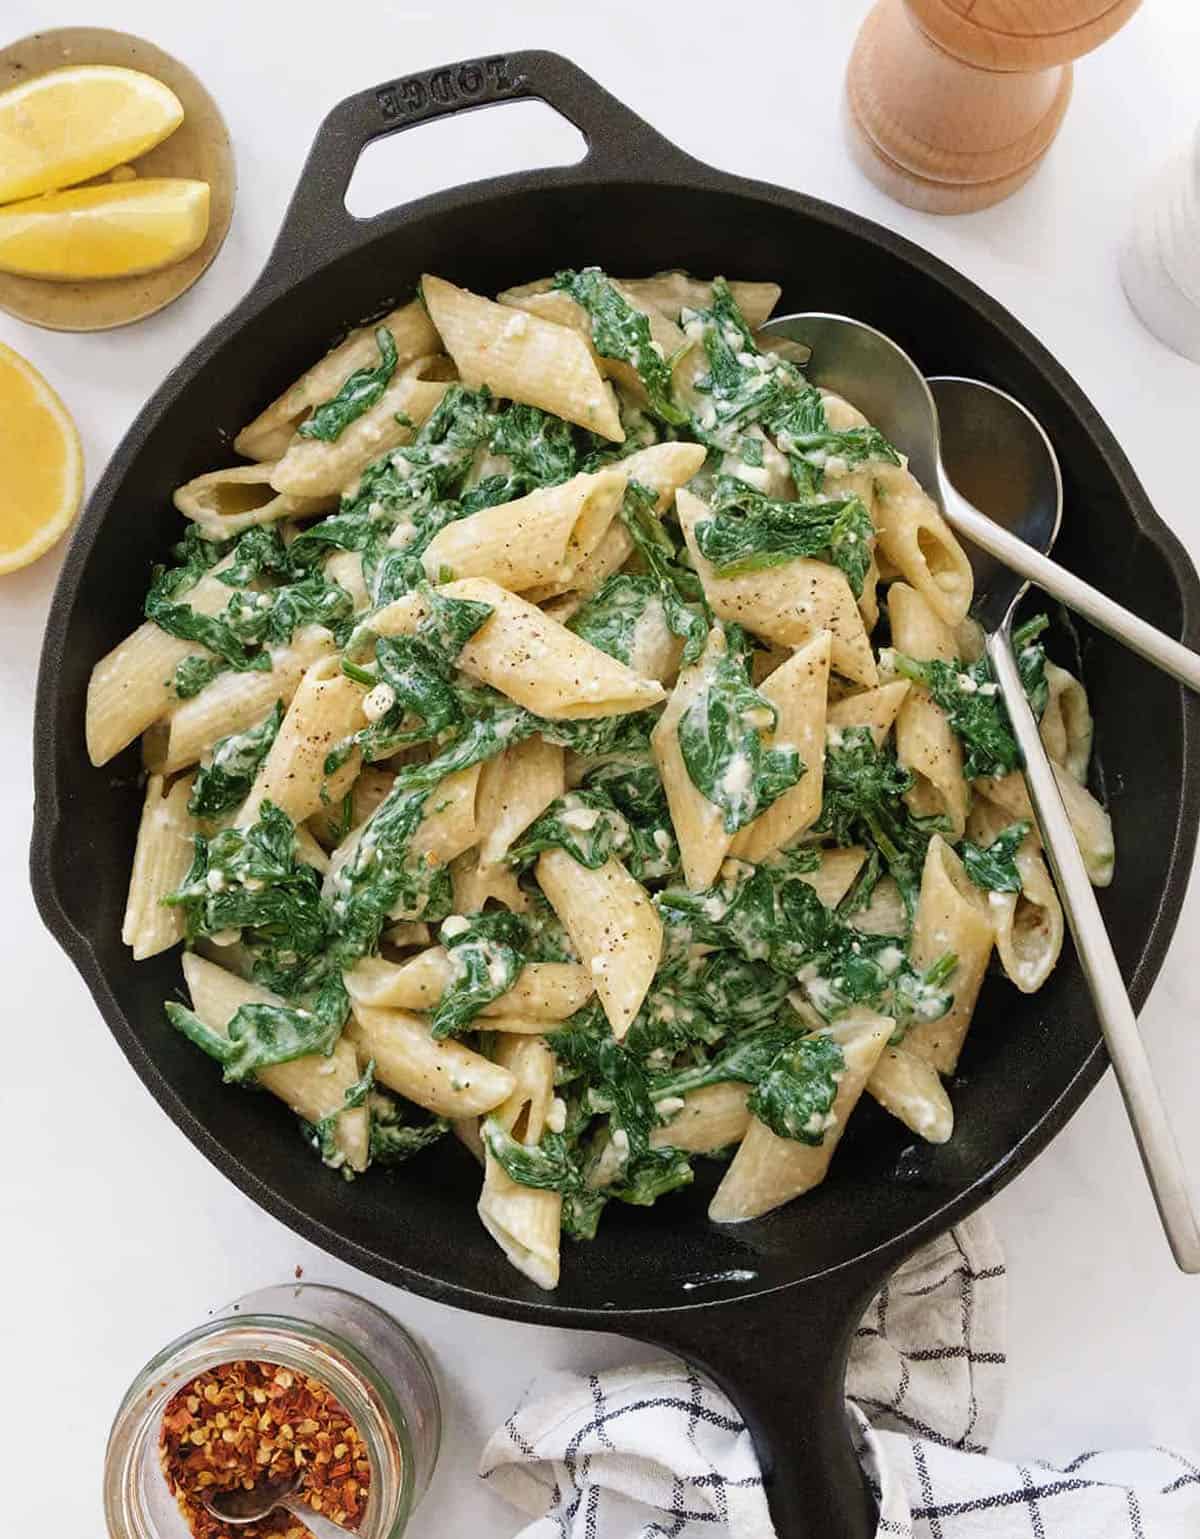 Top view of a cast iron skillet full of meatless pasta made with spinach and feta.